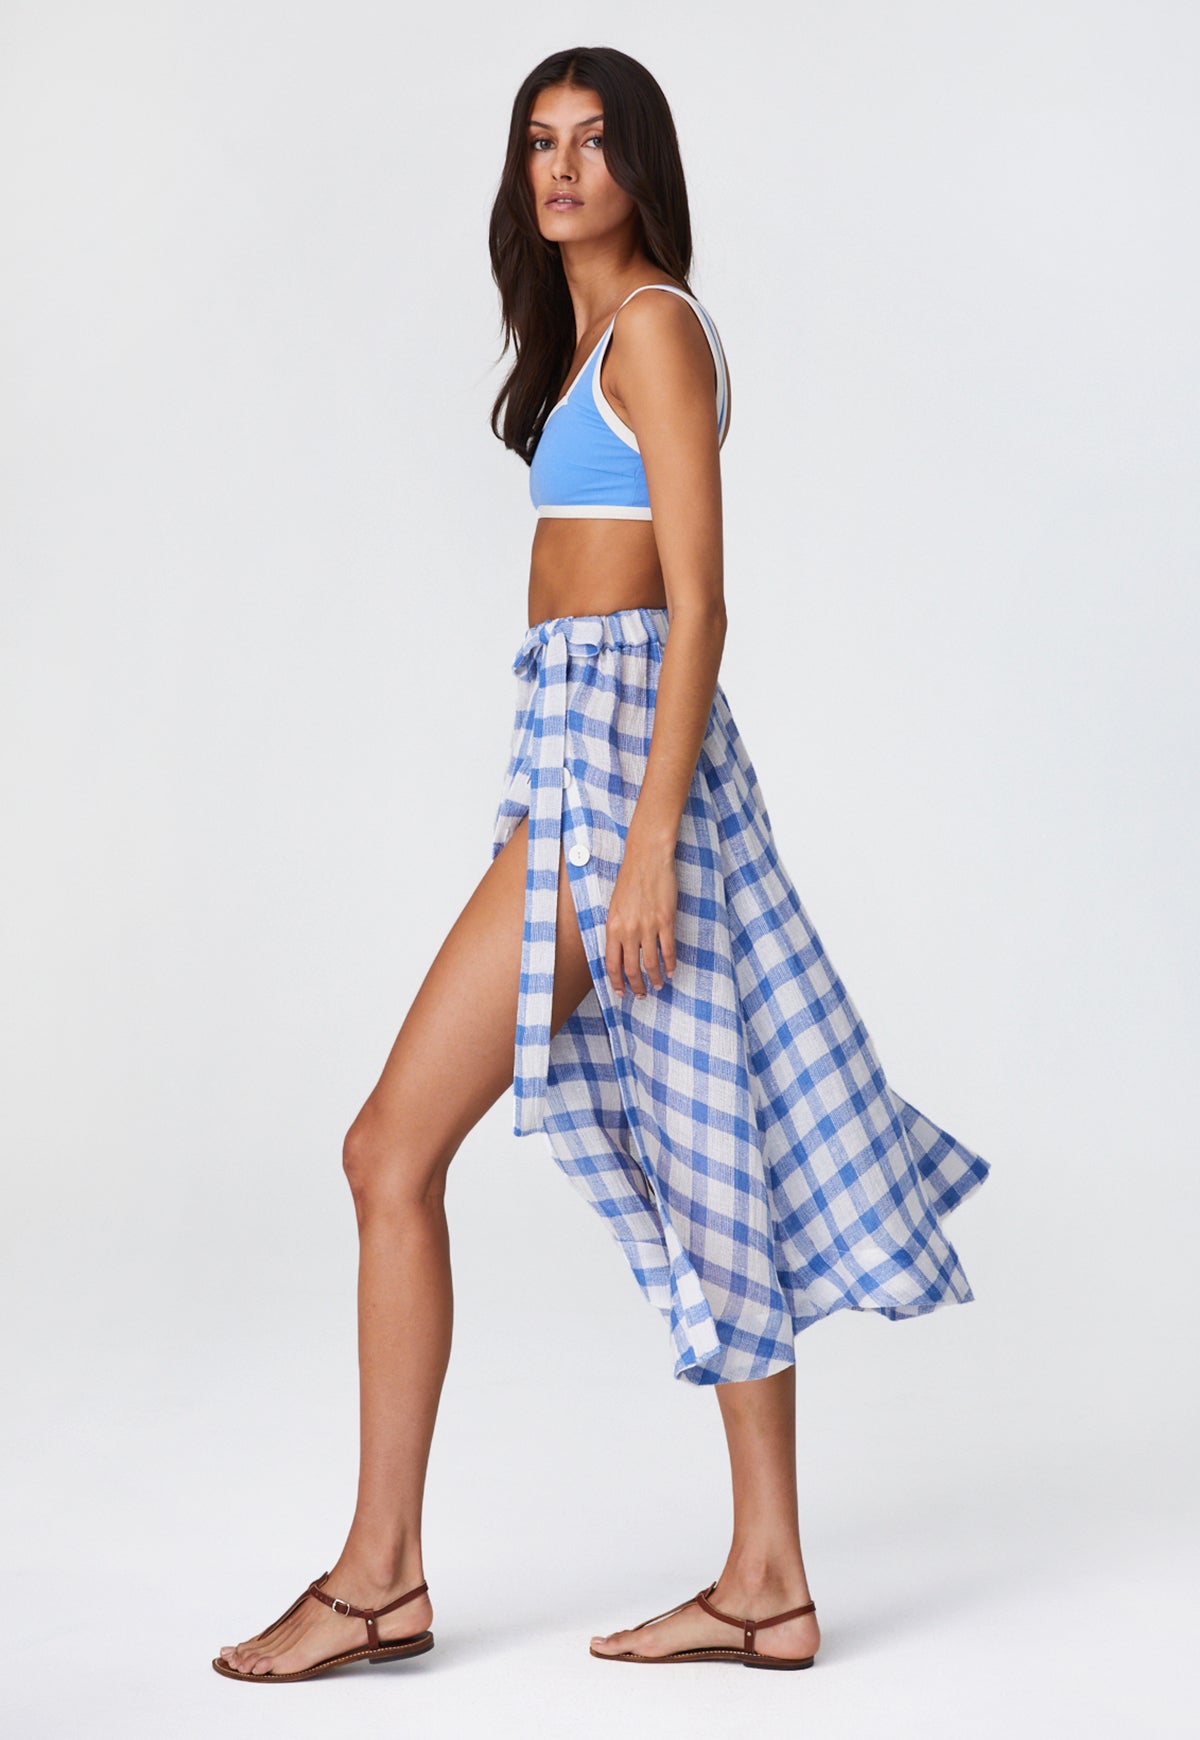 THE FULL CIRCLE SKIRT in AZURE GINGHAM CHIOS GAUZE